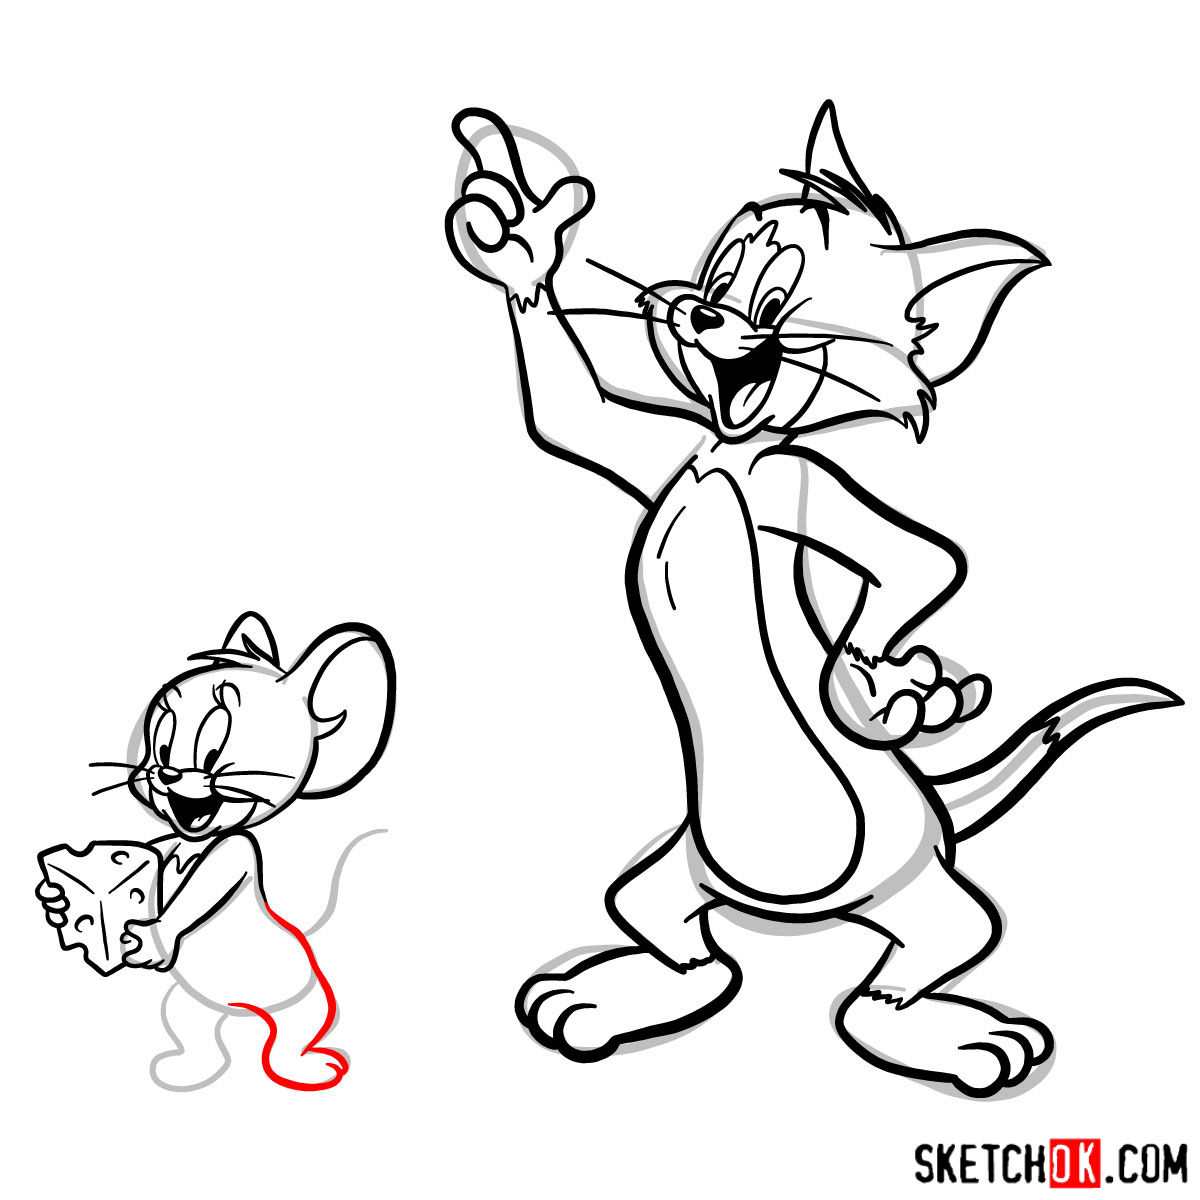 How to draw Tom and Jerry together - step 17